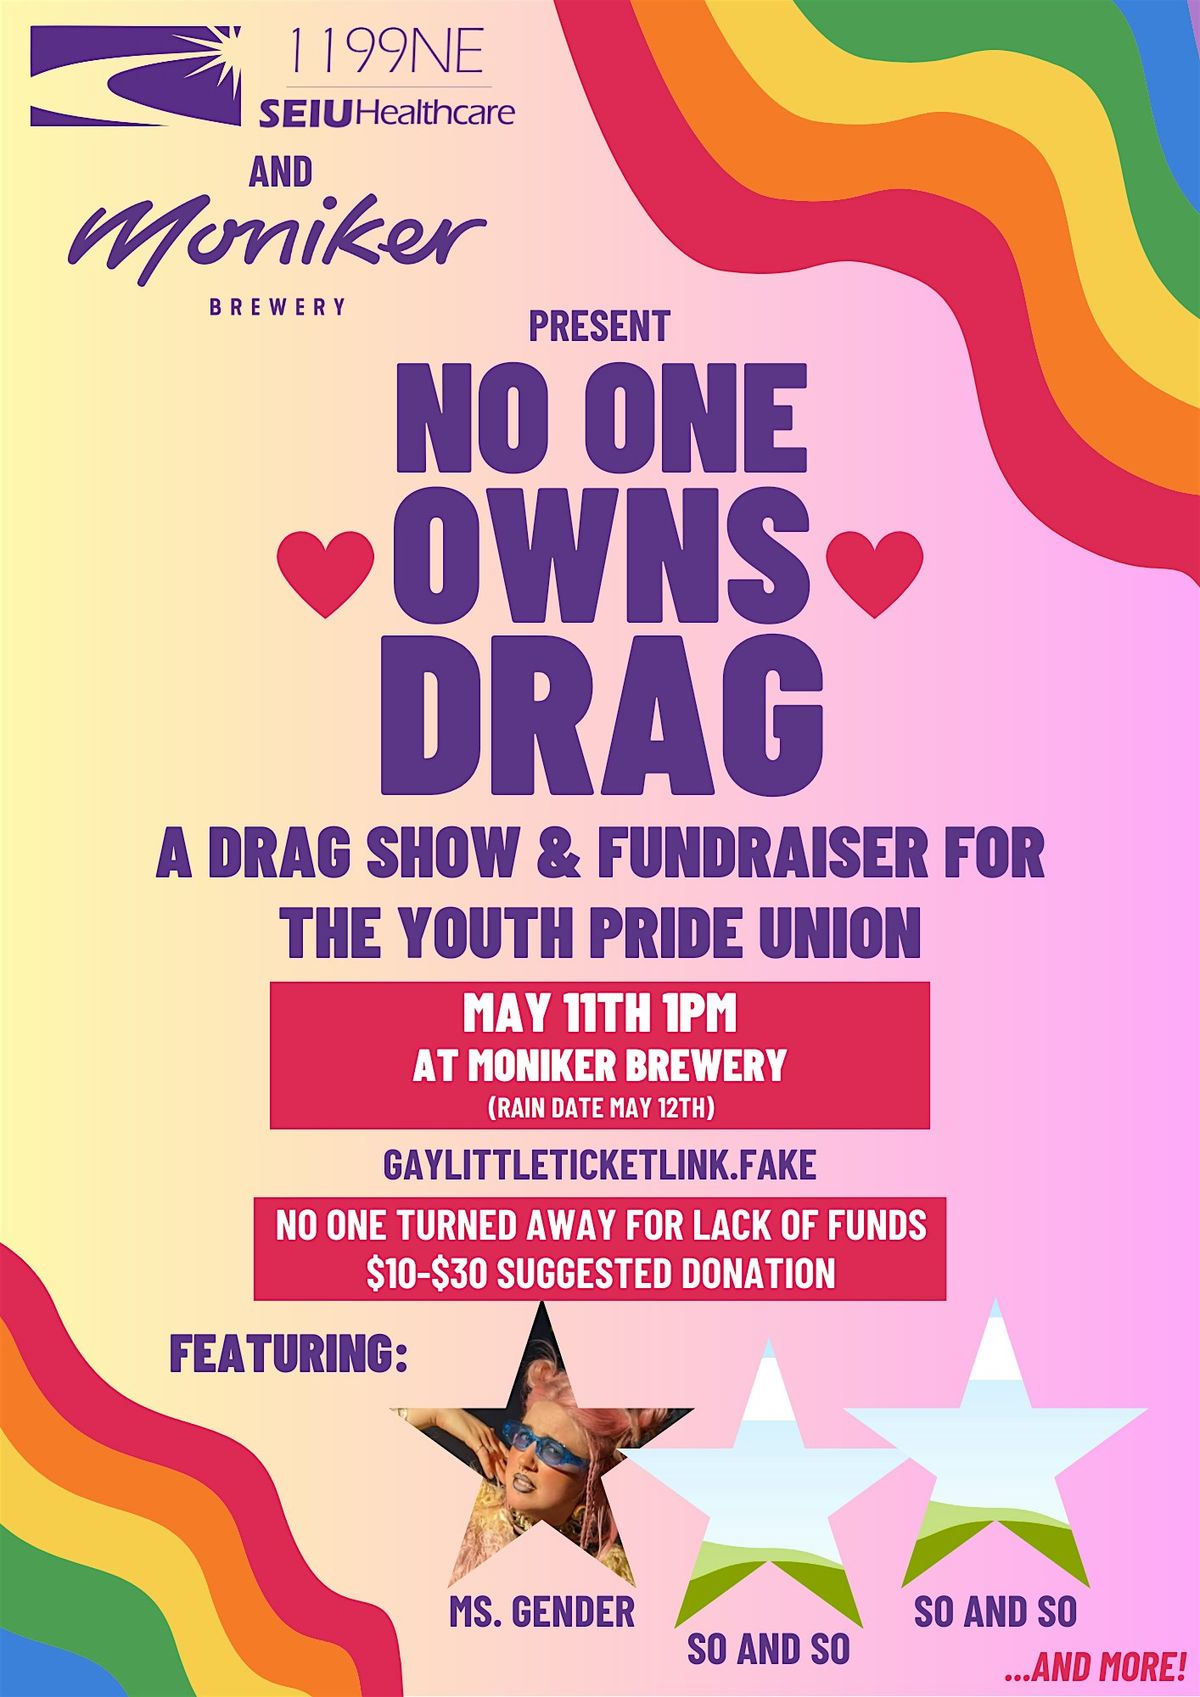 No One Owns Drag: A Drag Show and Youth Pride Inc. Union Fundraiser